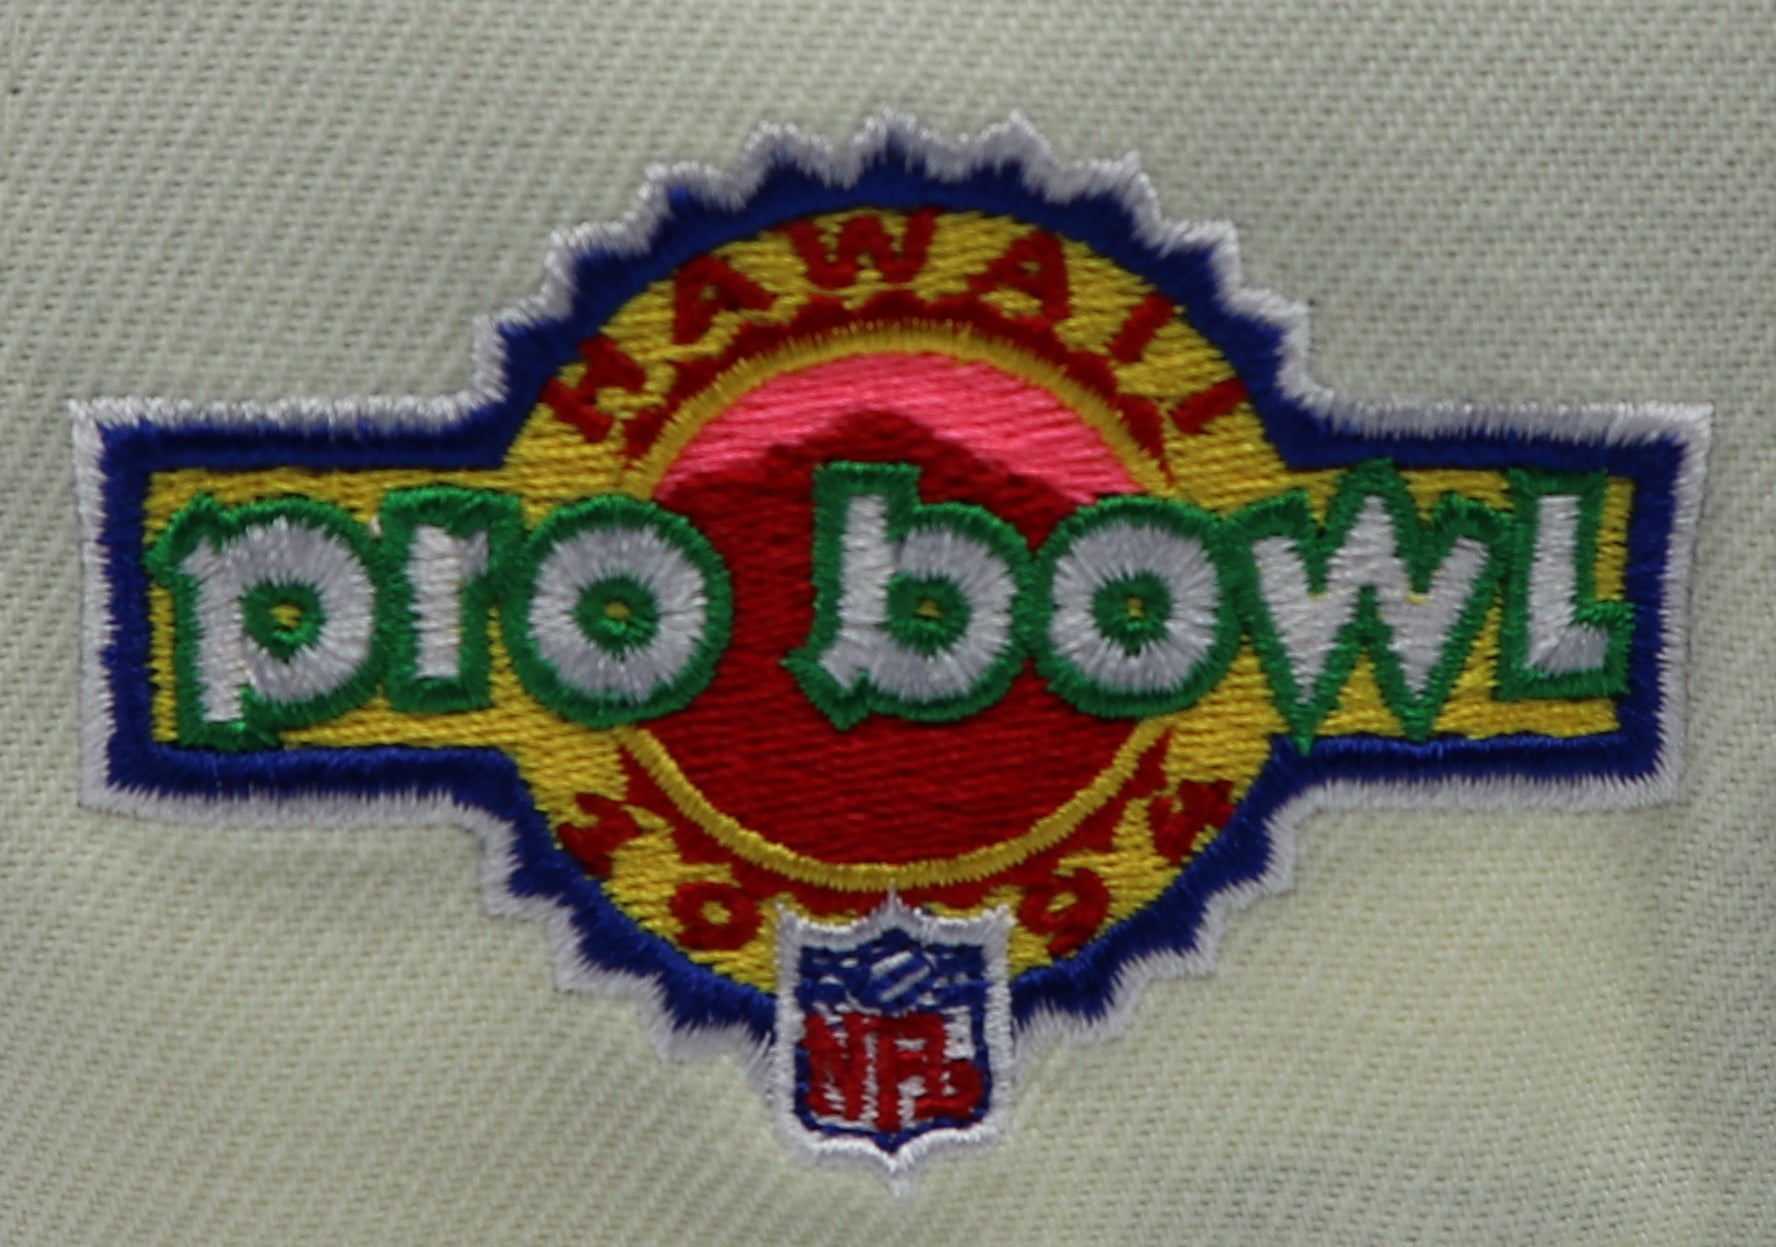 NEW YORK JETS (1994 PRO BOWL) NEW ERA 59FIFTY FITTED